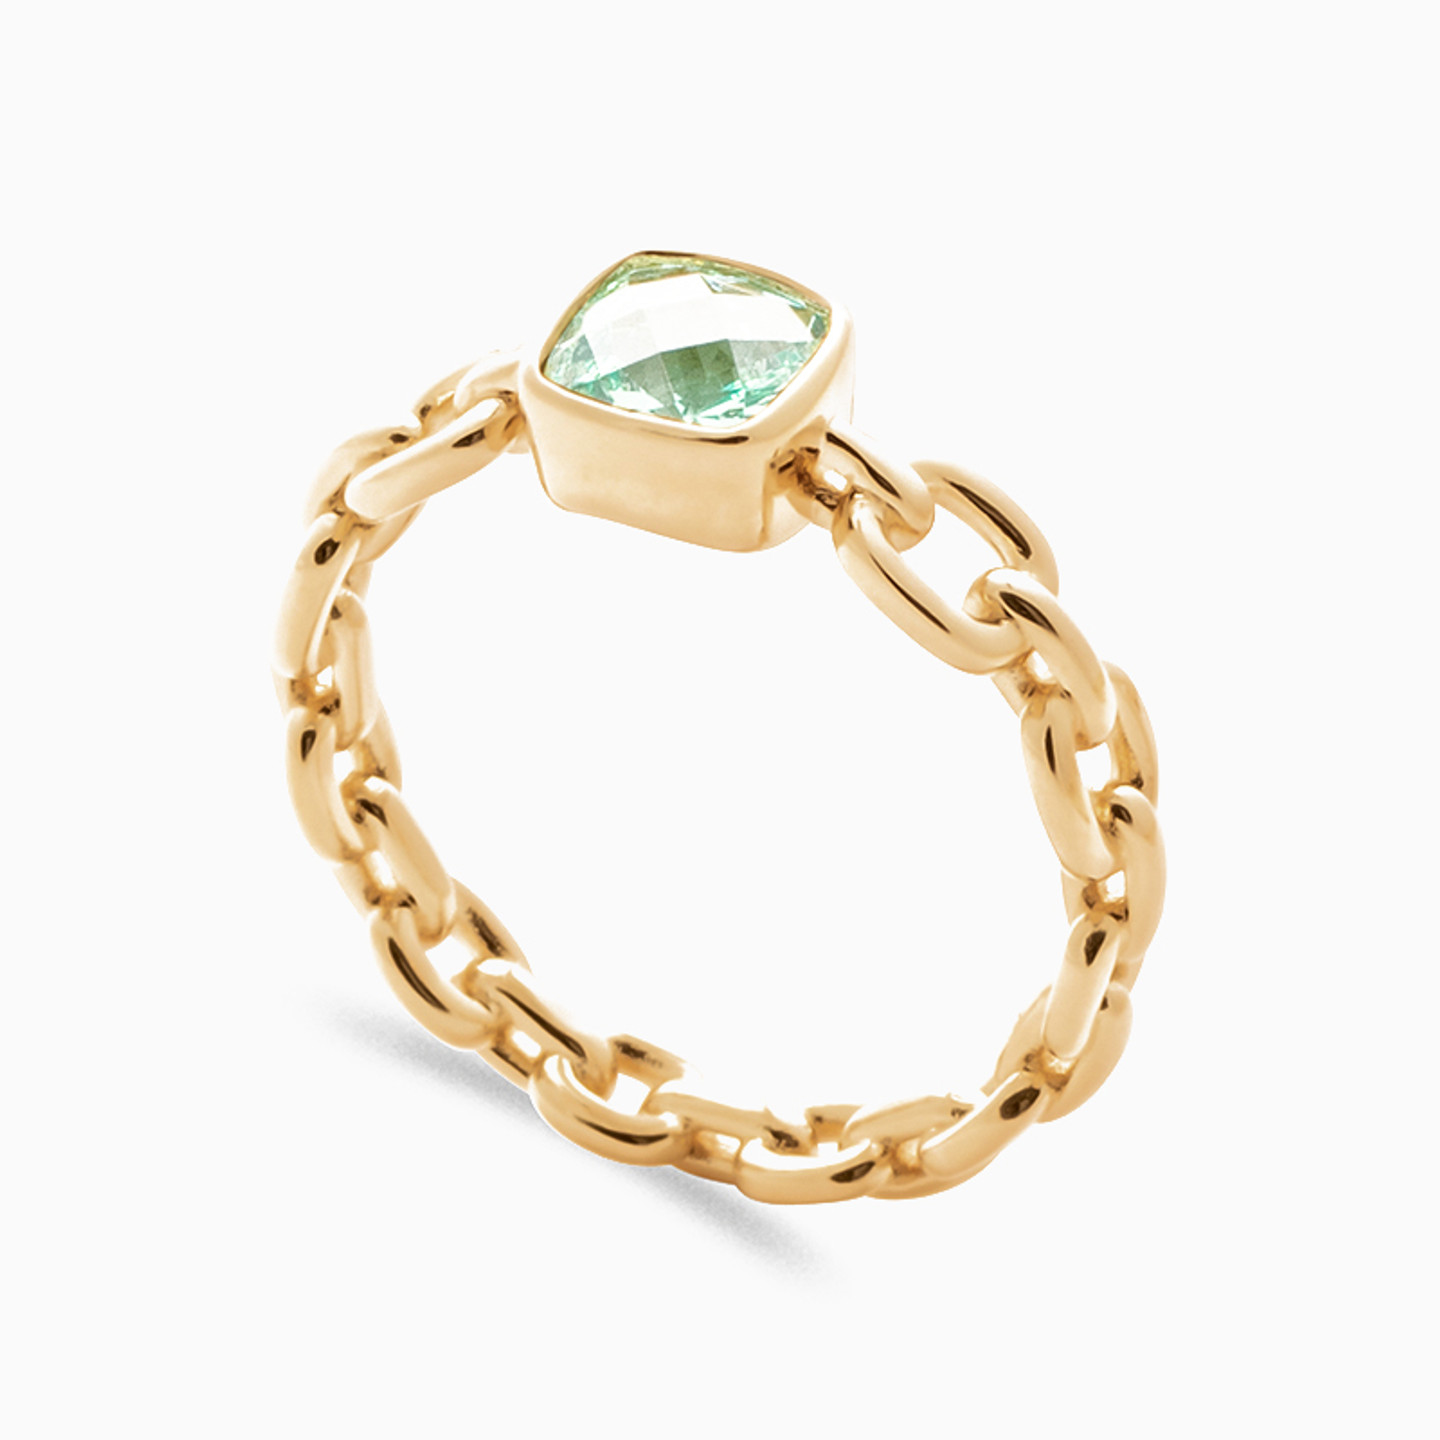 Gold Plated Colored Stones Statement Ring